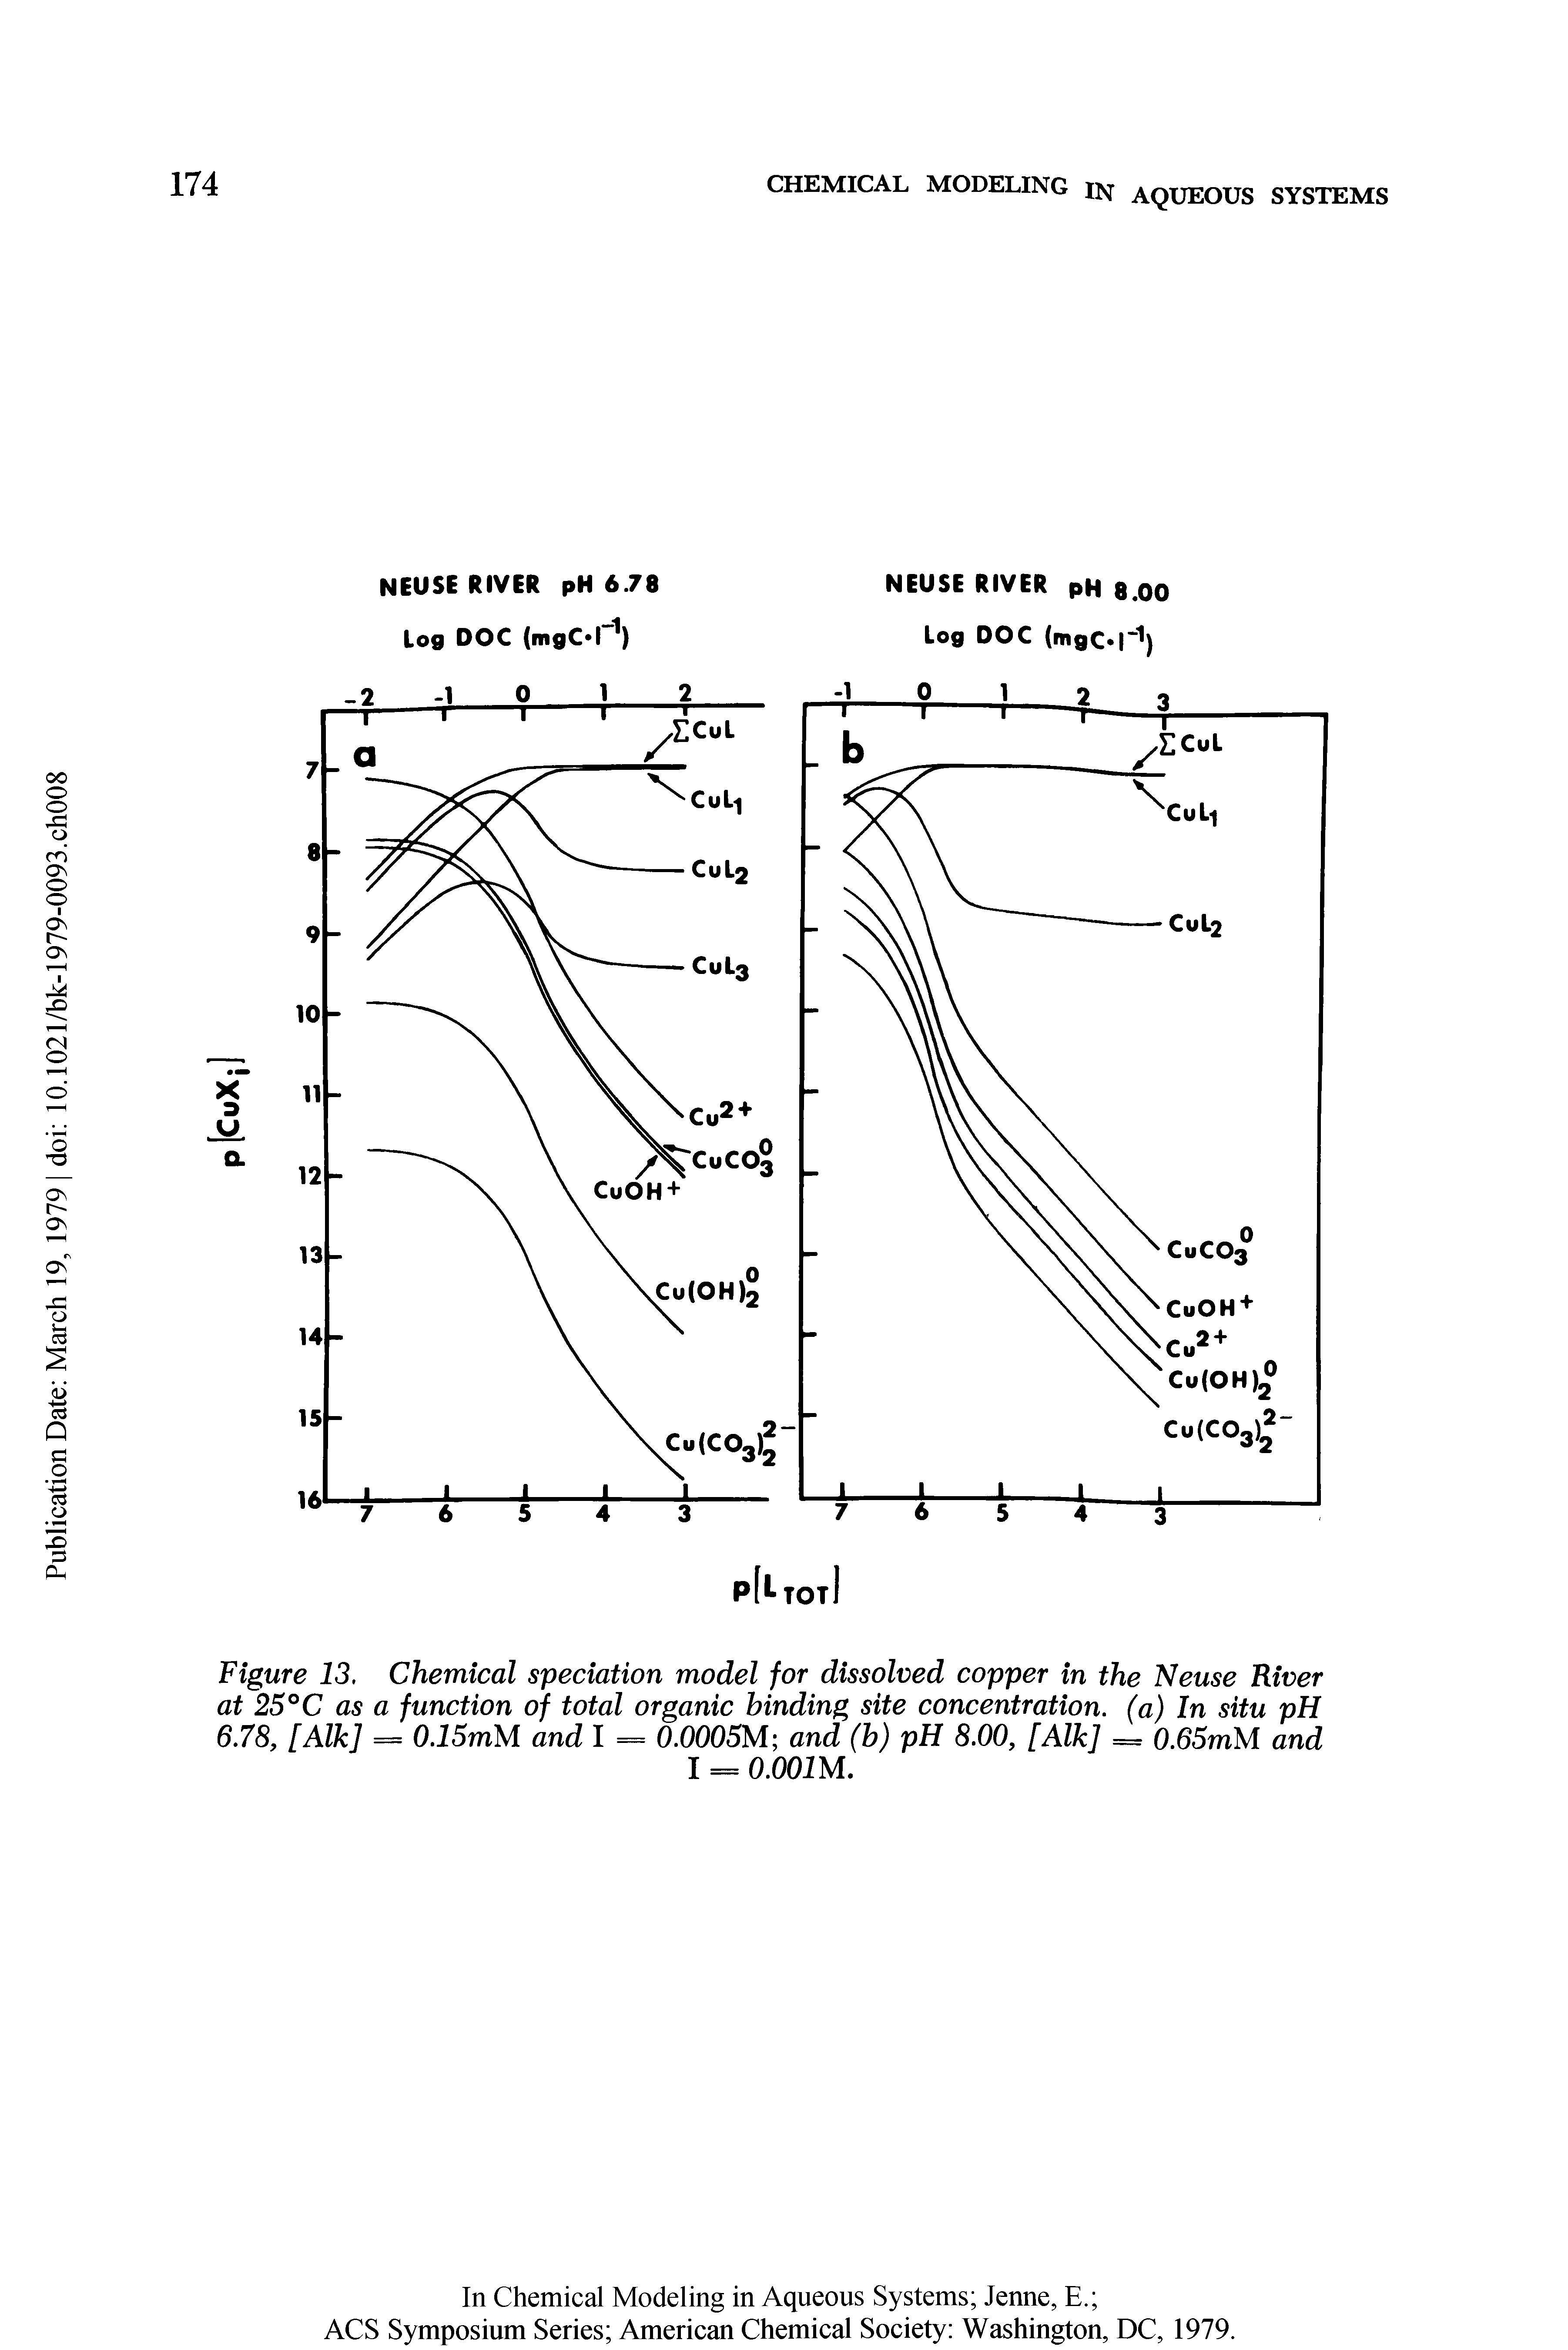 Figure 13. Chemical speciation model for dissolved copper in the Neuse River at 25°C as a function of total organic binding site concentration, (a) In situ pH 6.78, [Aik] = O.lSmM and I = 0.0005M and (b) pH 8.00, [Aik] = 0.65mM and...